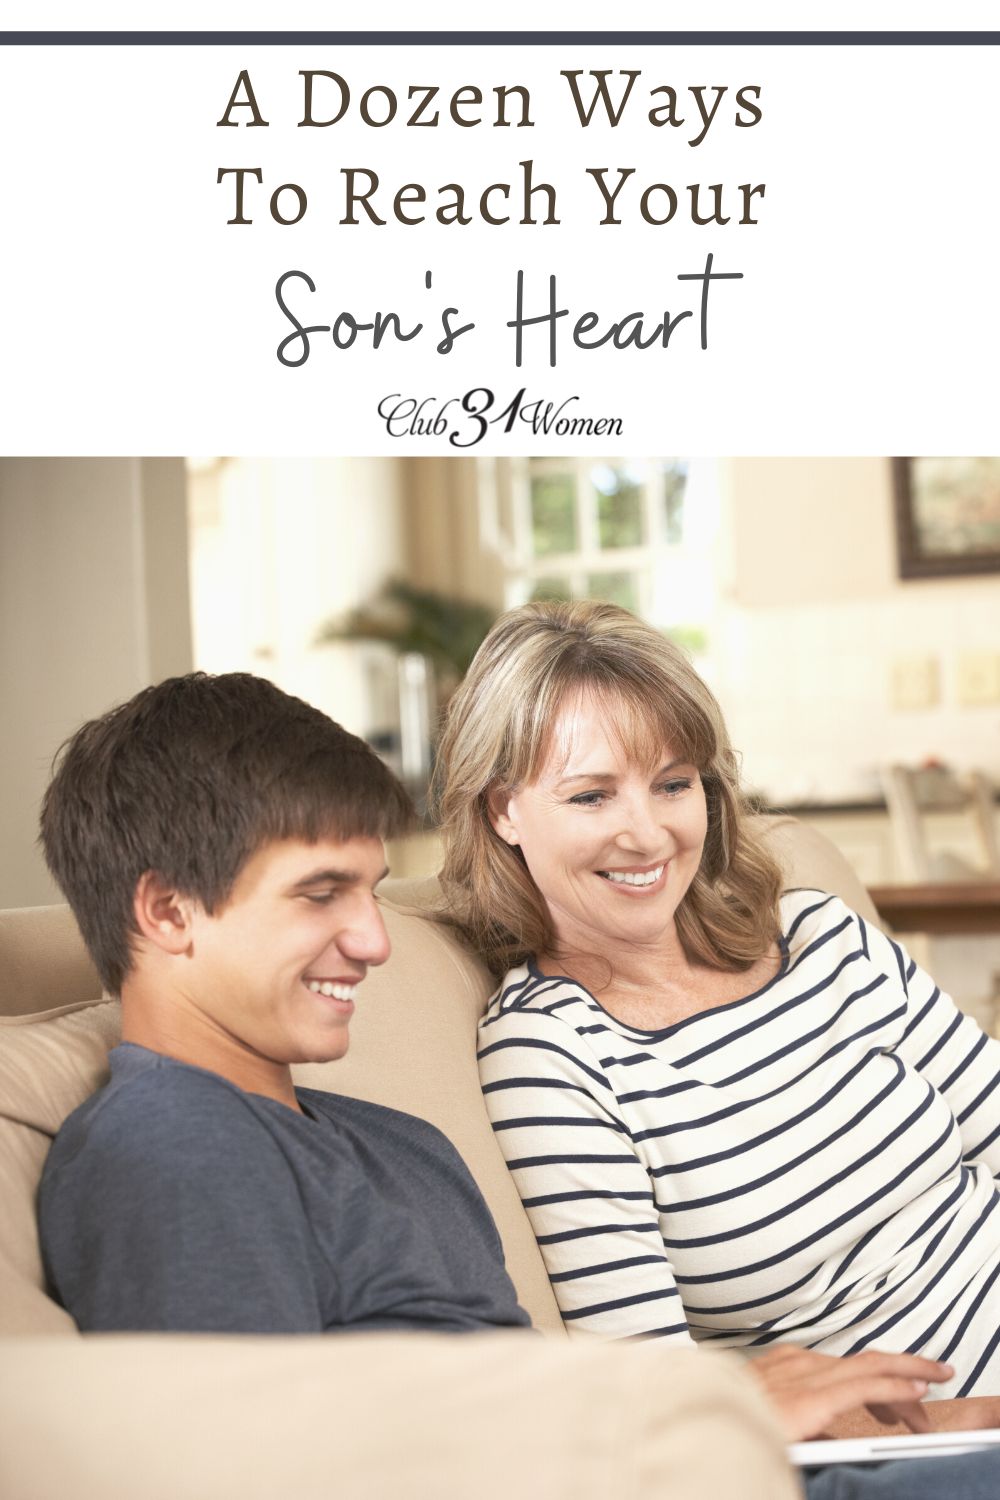 How do you reach your son's heart? How can you connect with him as he is growing up right before your eyes? Here are a dozen ways to grow closer together! via @Club31Women